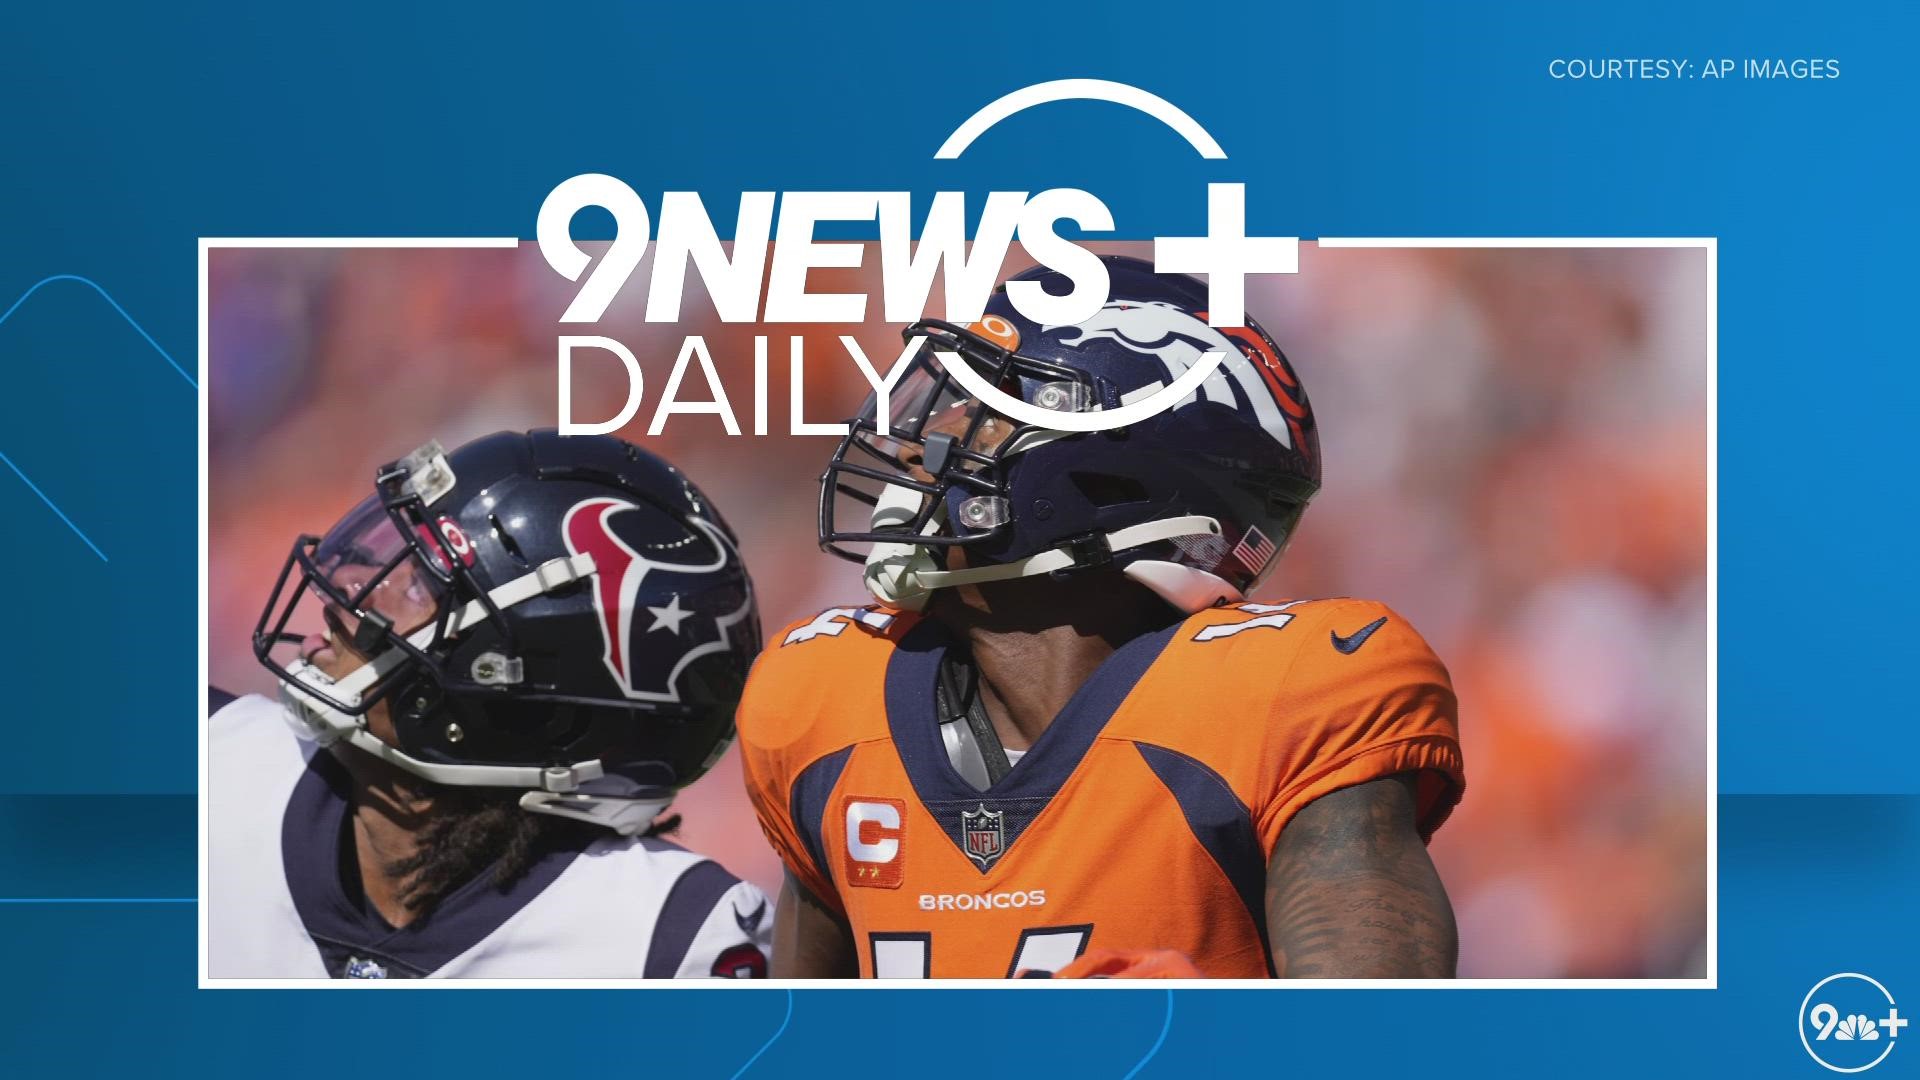 Sports Director Rod Mackey discusses what adjustments the Denver Broncos need to make to pull off a win against the San Francisco 49ers on Sunday night.